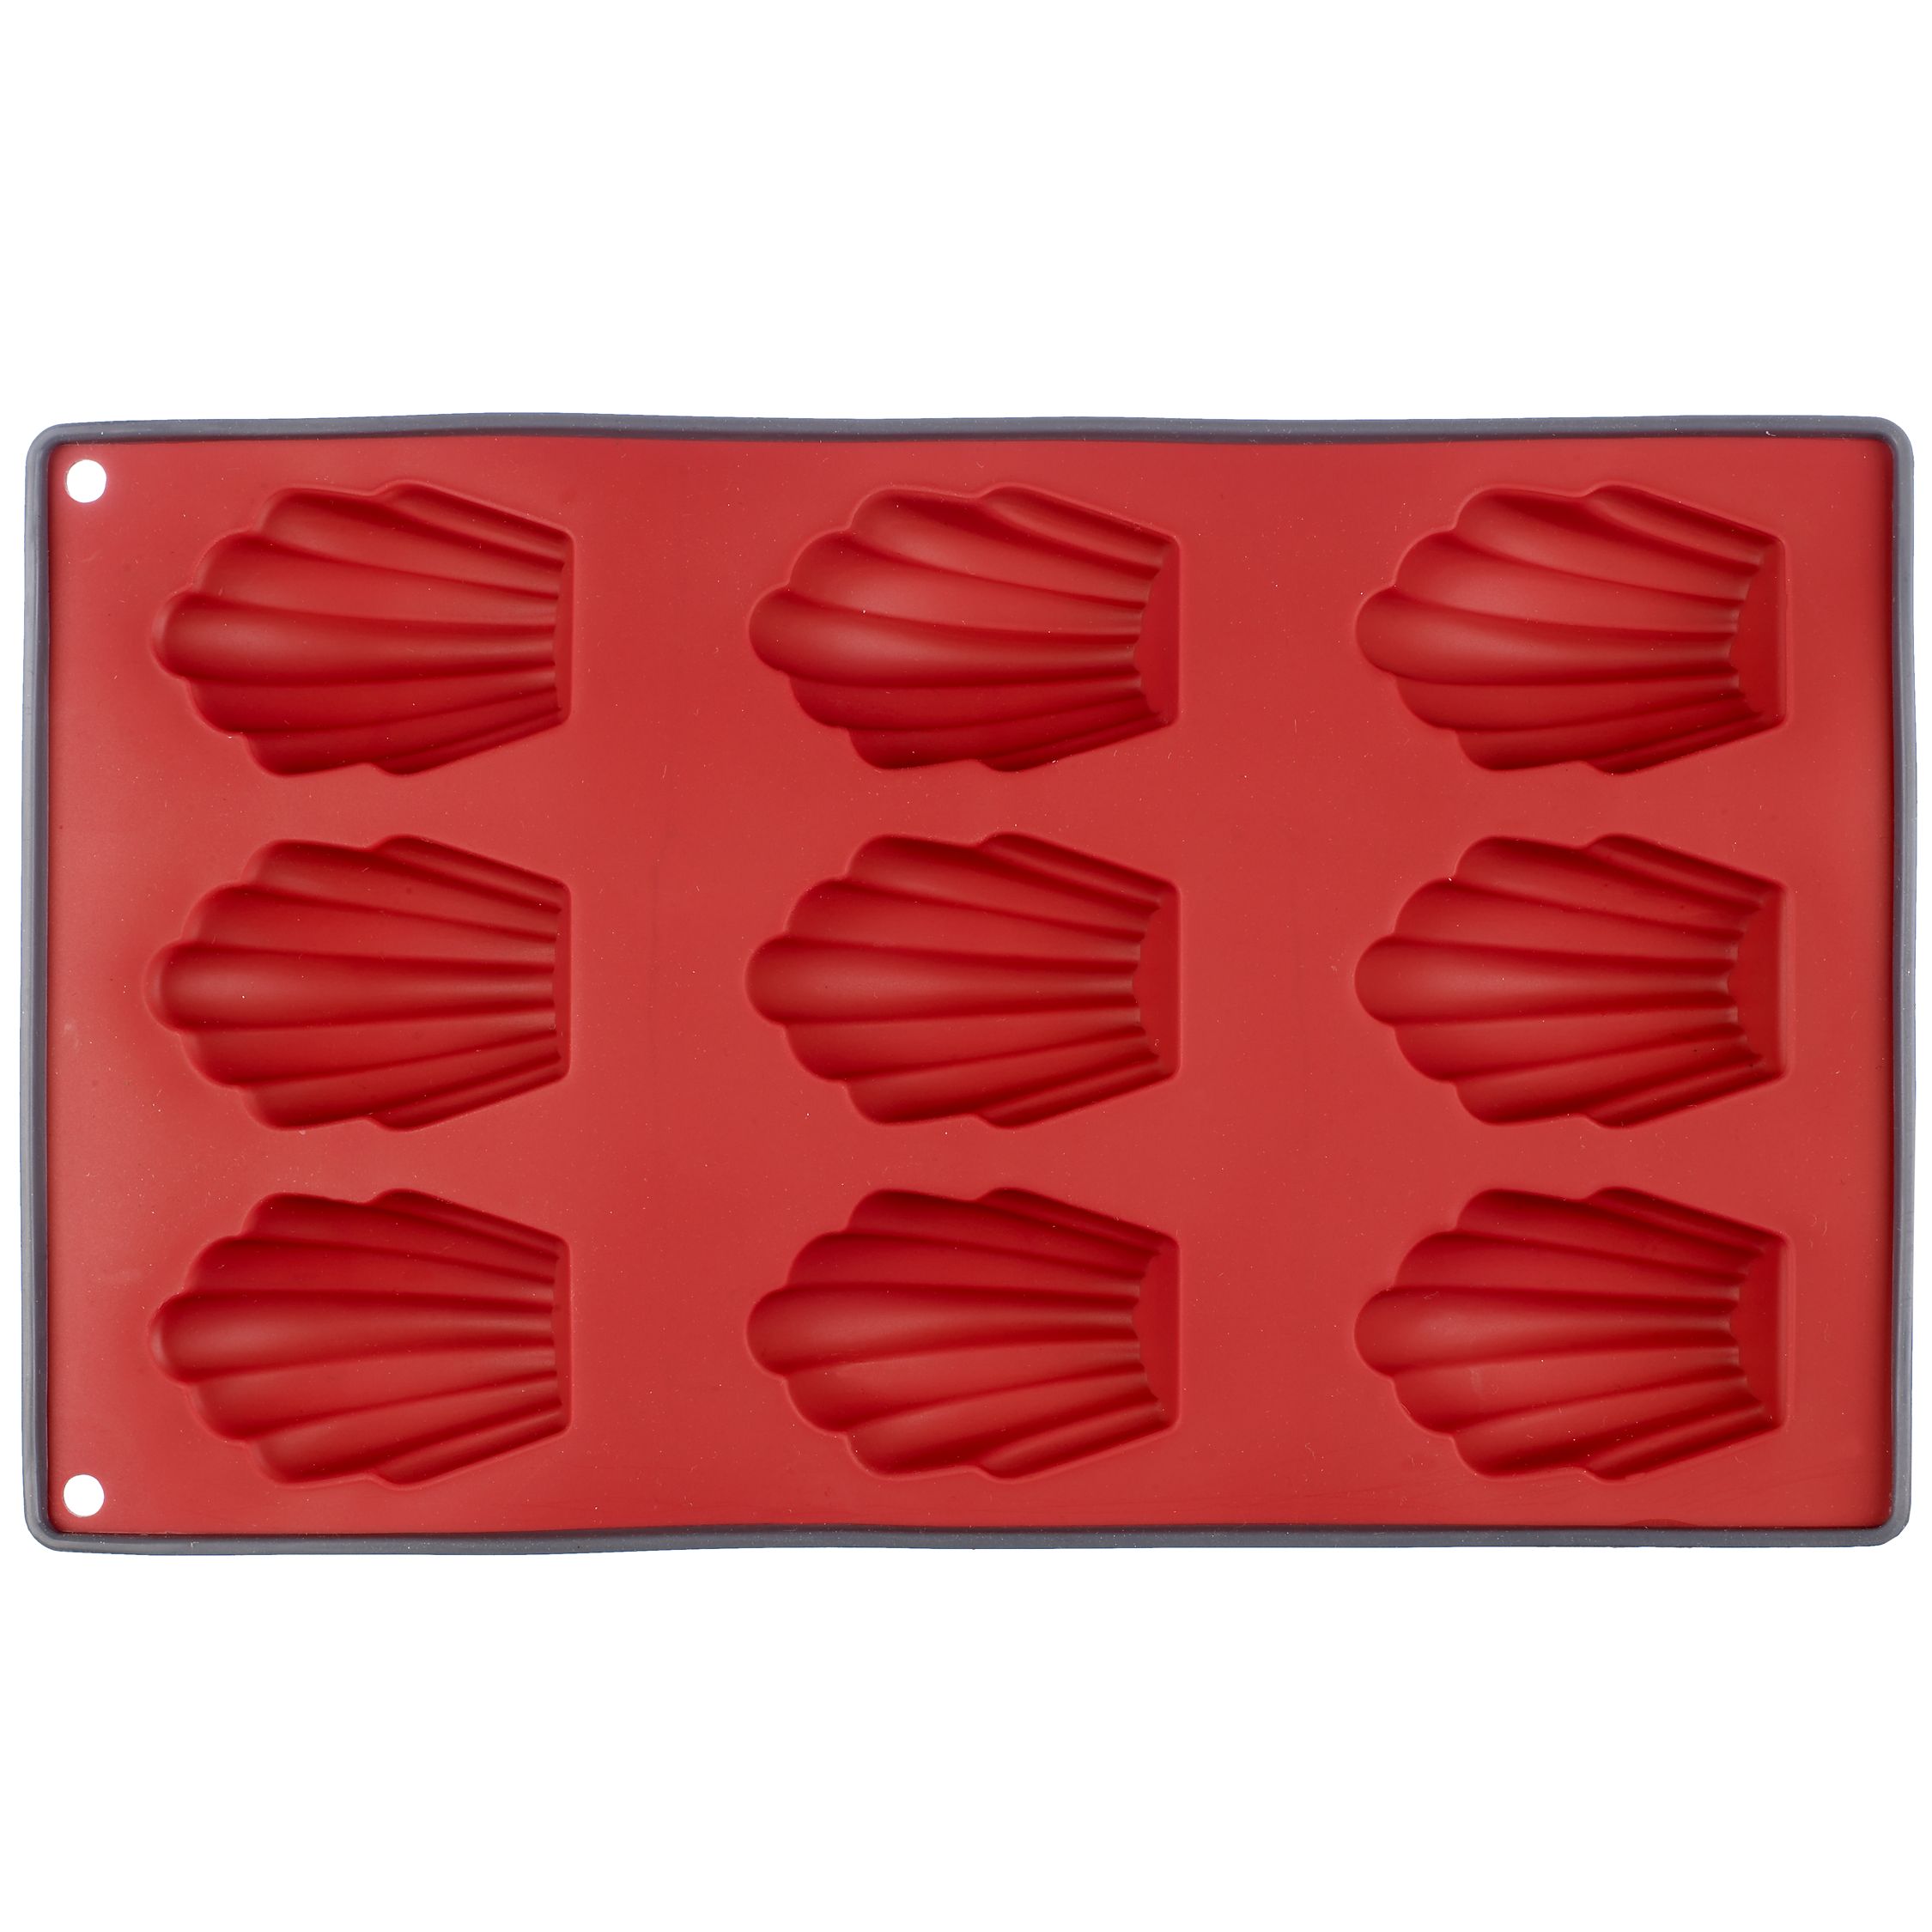 9 Cup Madeleine Mould, Red